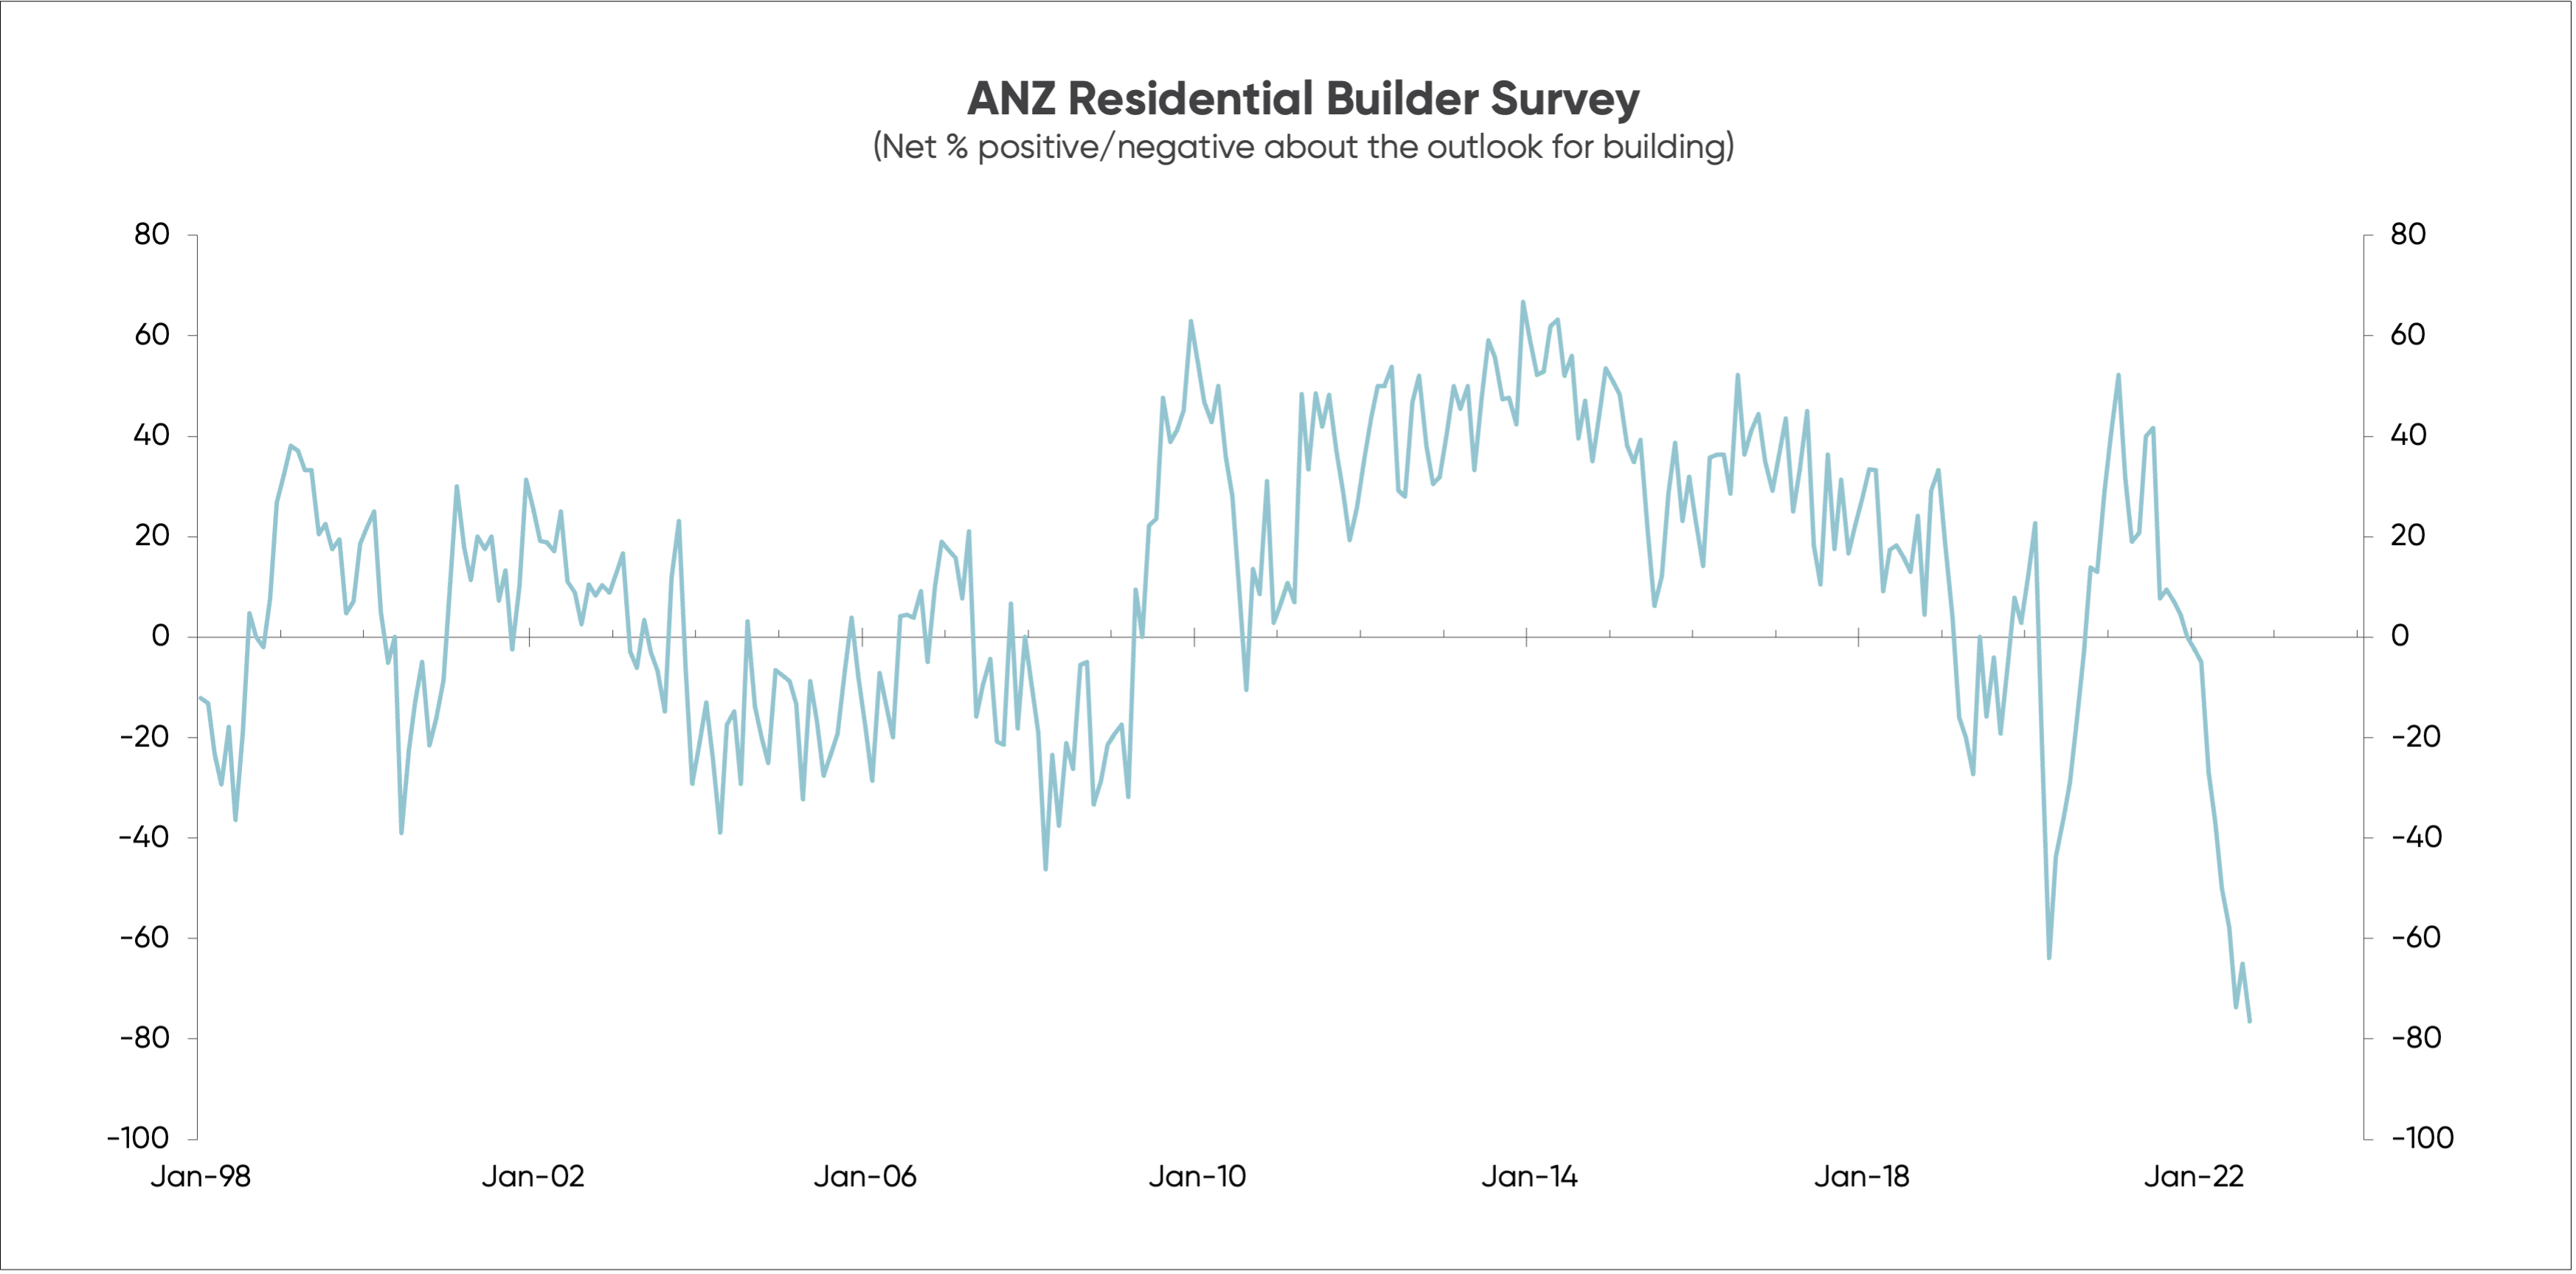 Graph showing sentiment of NZ residential building industry over time